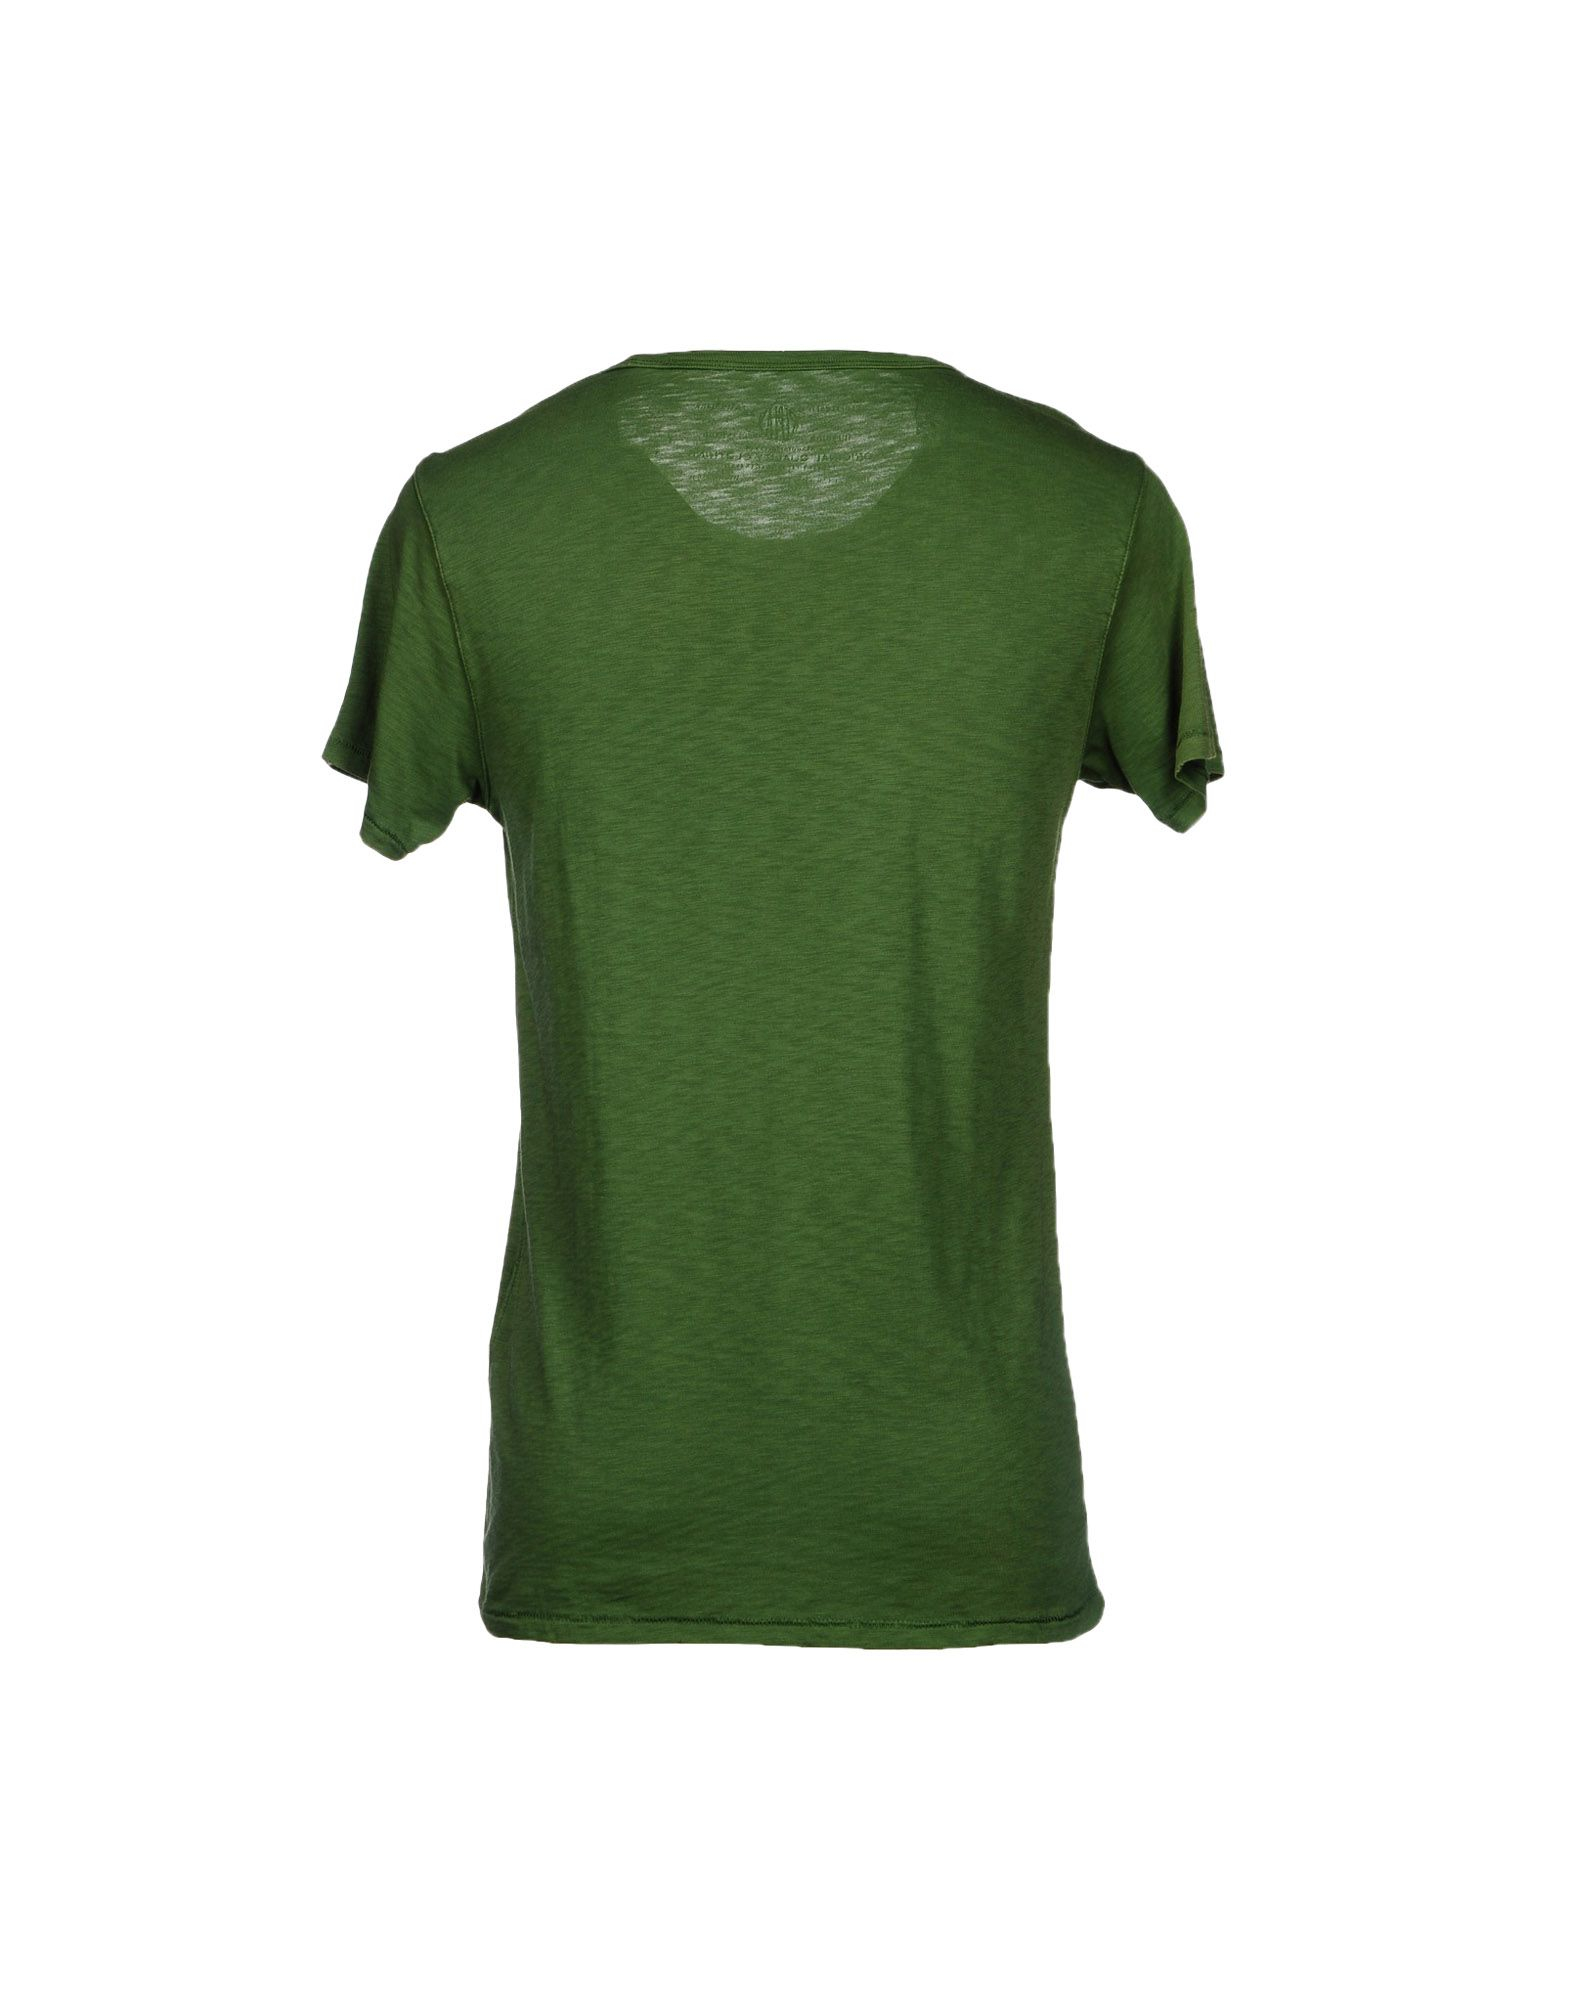 Lyst - Replay T-shirt in Green for Men